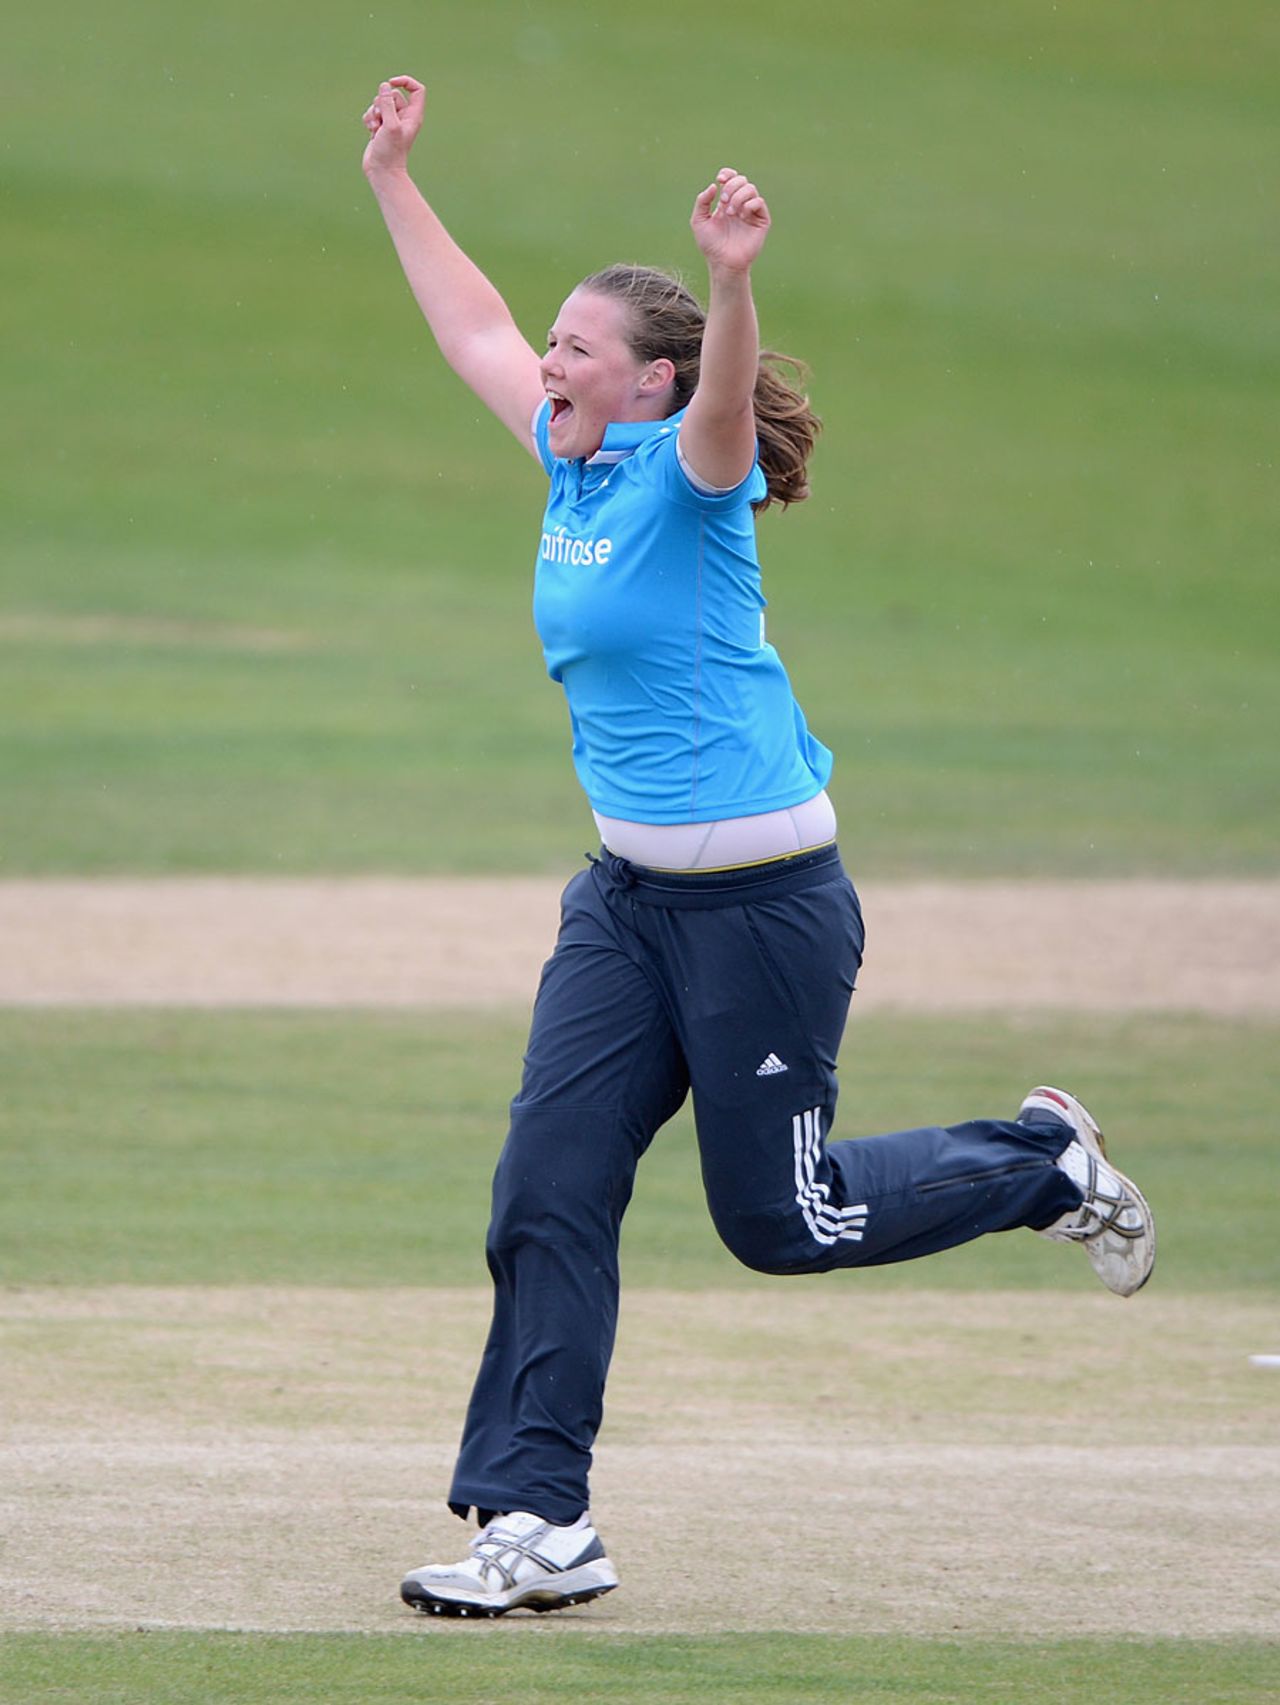 Anya Shrubsole made early breakthroughs for England, England v India, 1st women's ODI, Scarborough, August 21, 2014